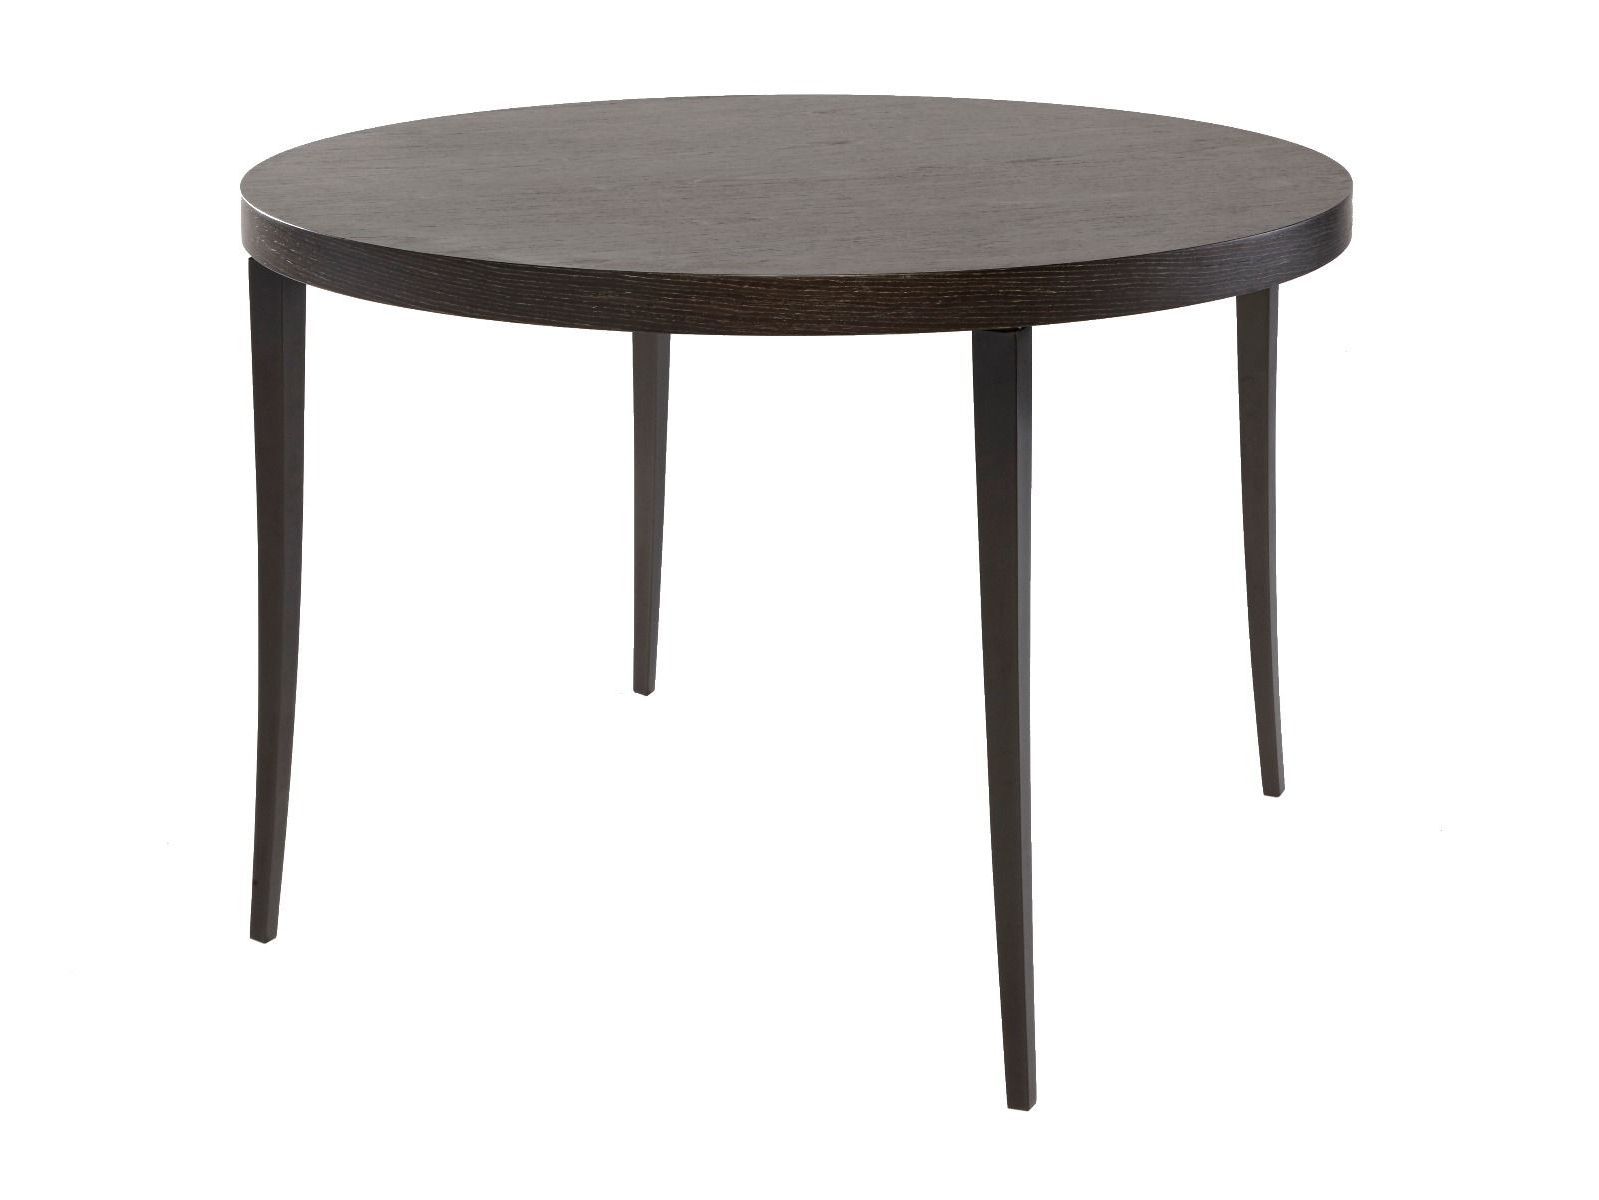 Widely Used White Circular Dining Tables With Regard To Circular Dining Table (View 15 of 25)